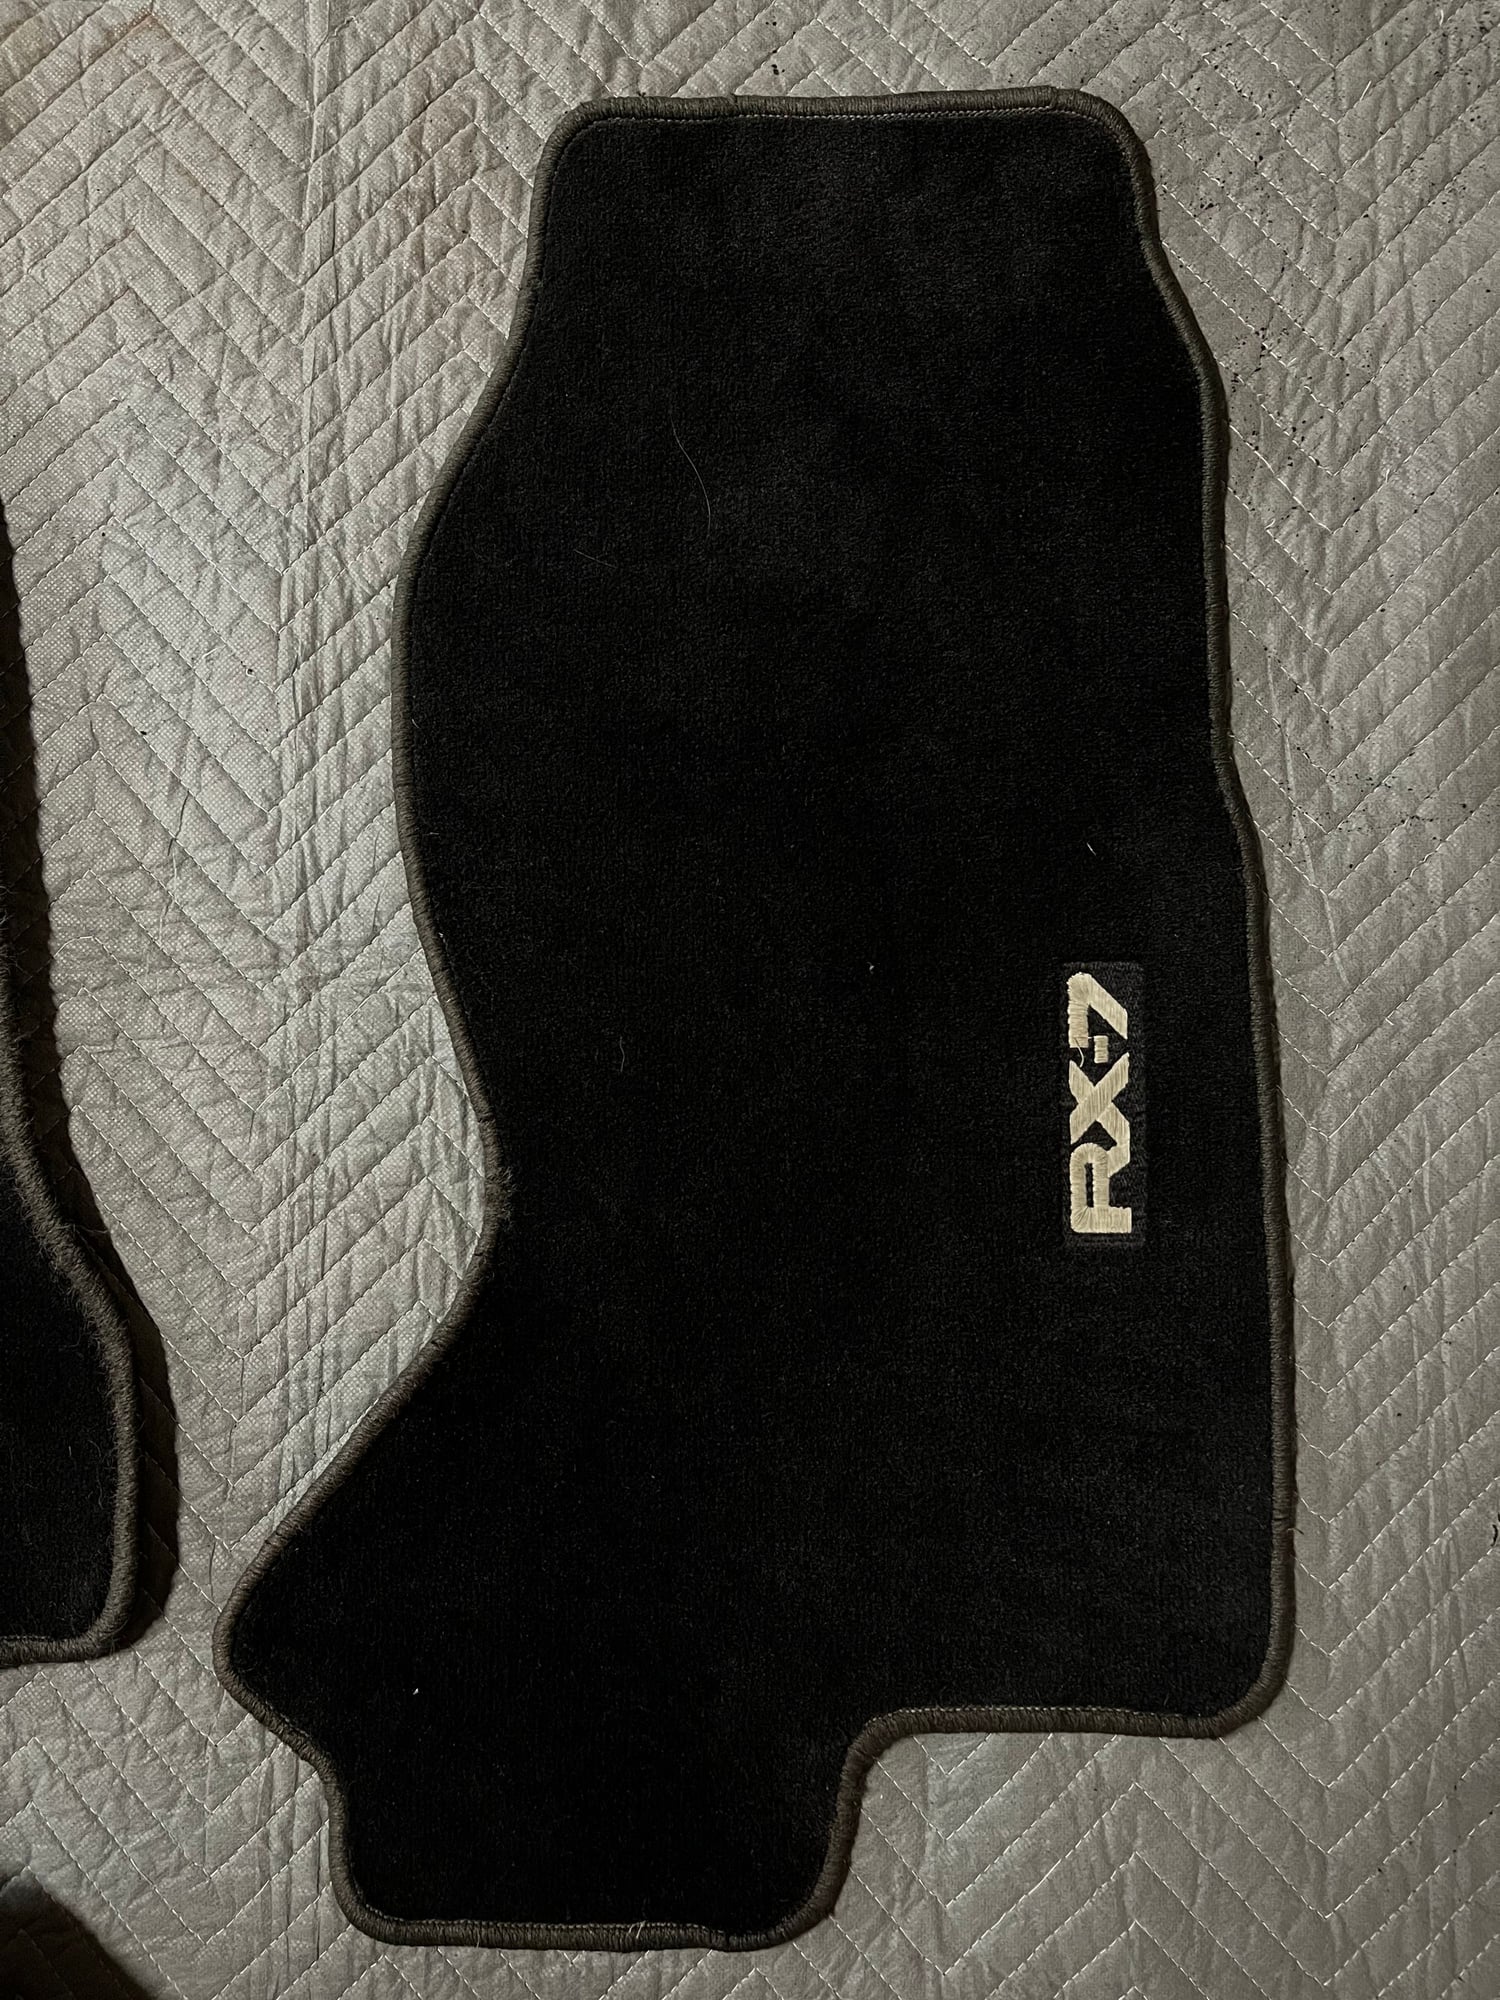 Interior/Upholstery - 94 OEM LHD floor mats 51k miles great shape - Used - 1993 to 1996 Mazda RX-7 - Concord, NH 03303, United States